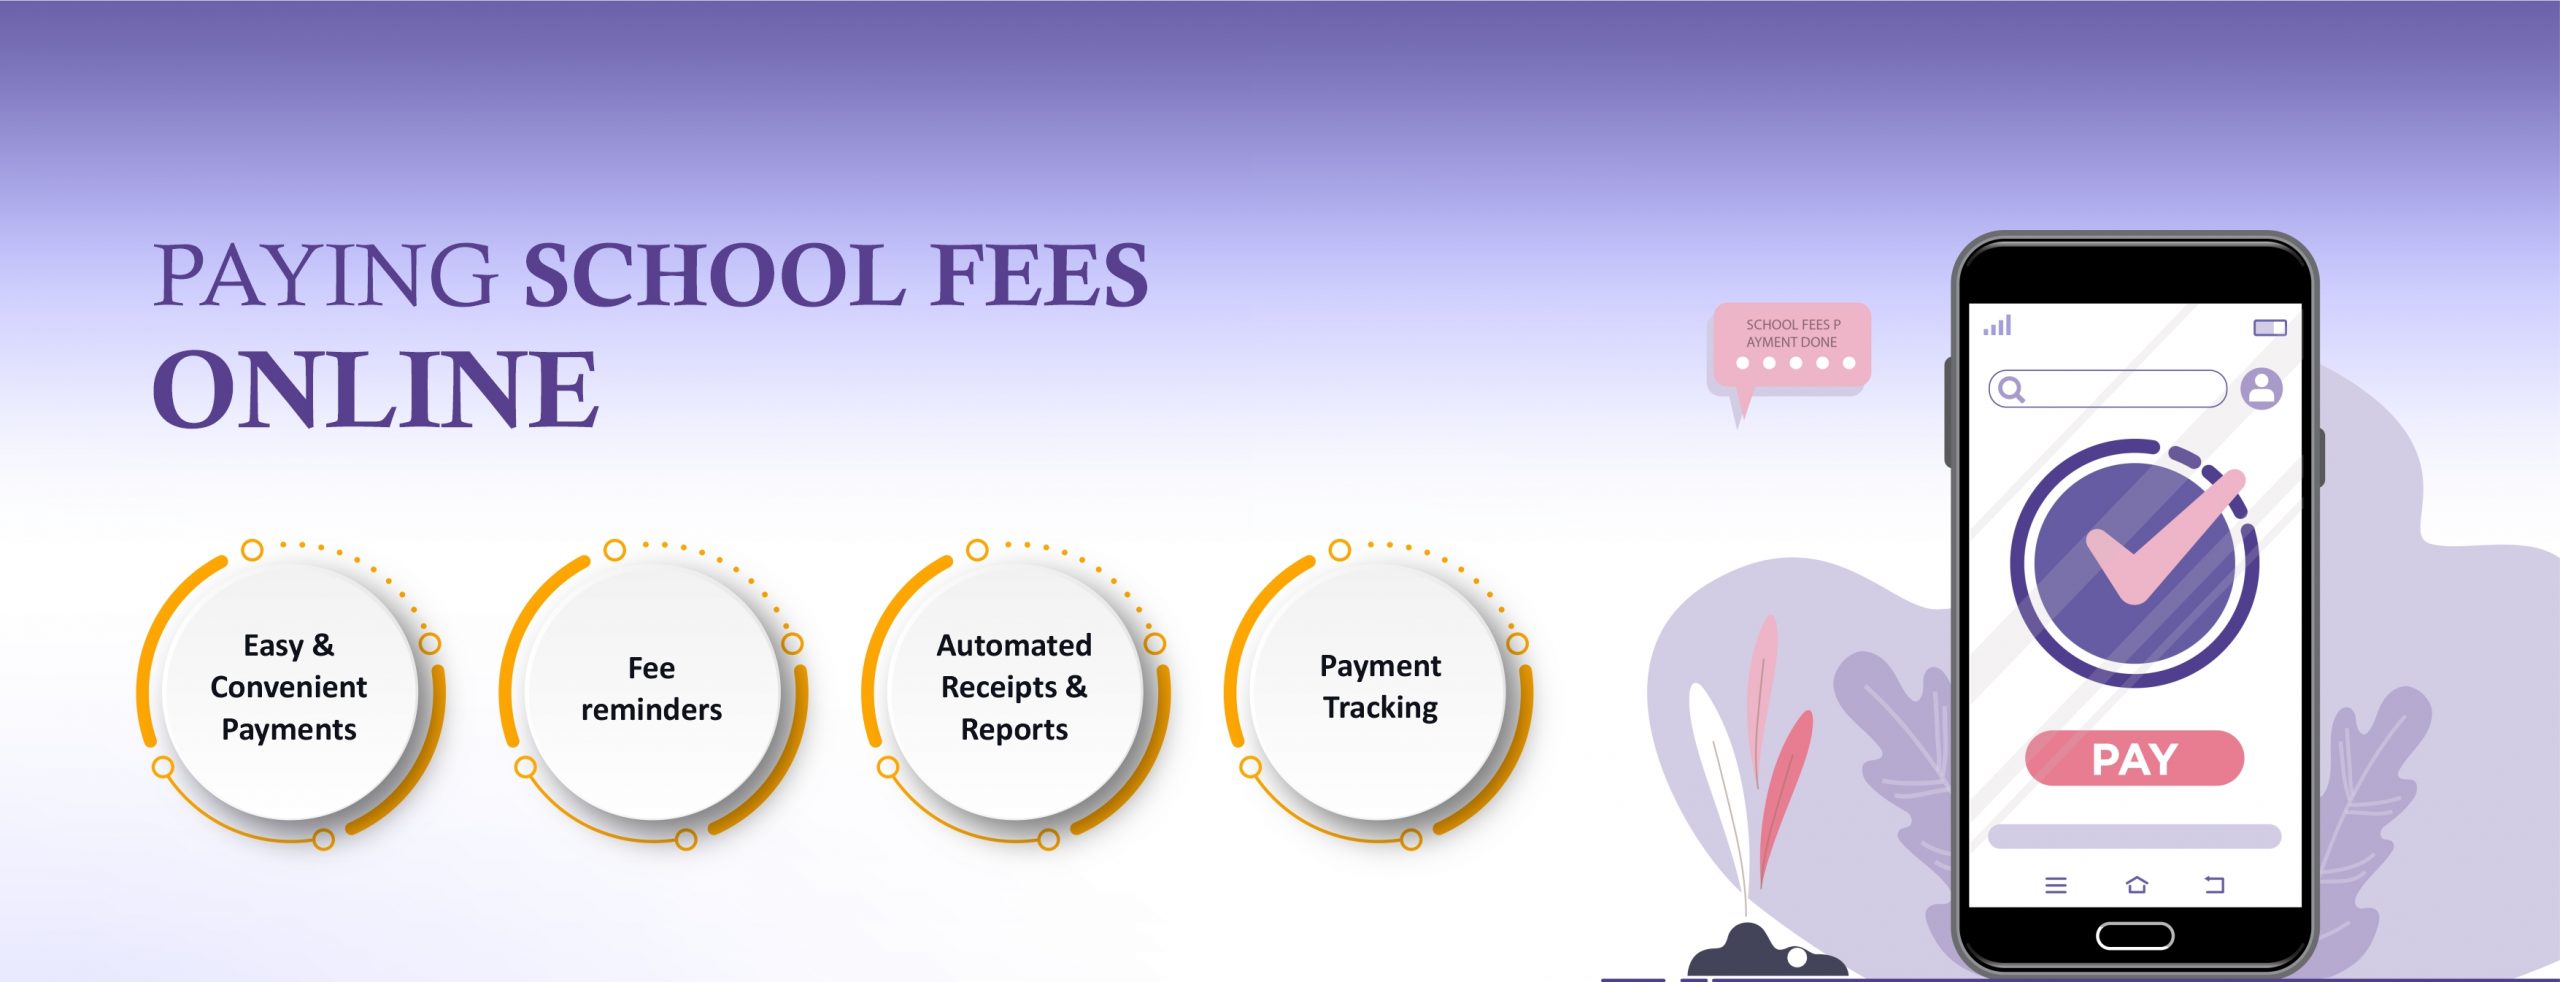 Paying School Fees Online-Do’s and Dont’s